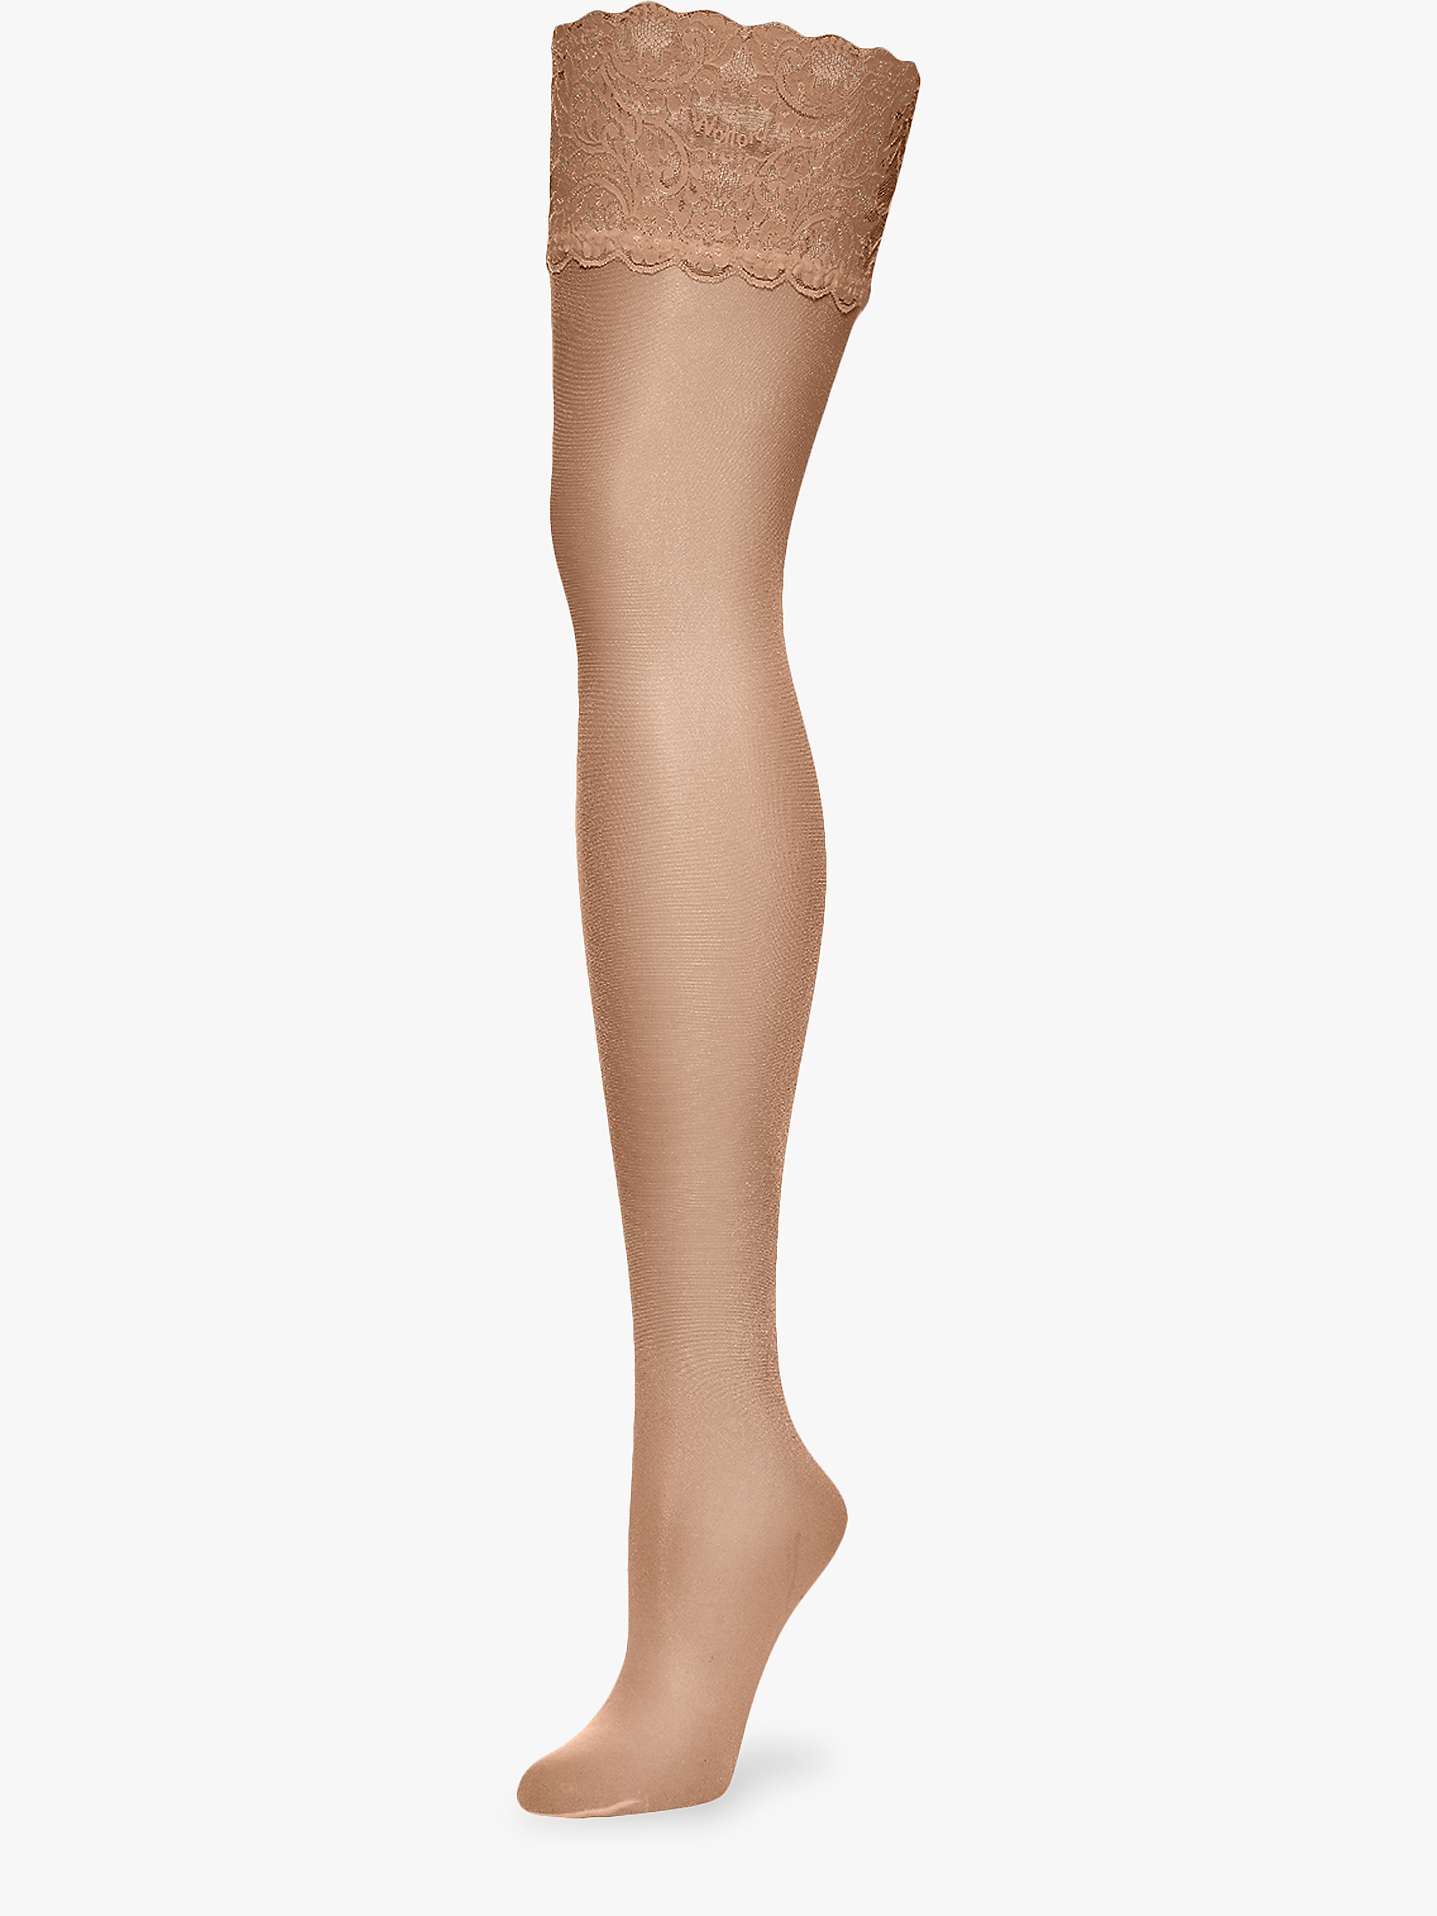 Buy Wolford Satin Touch 20 Denier Stay Ups Online at johnlewis.com